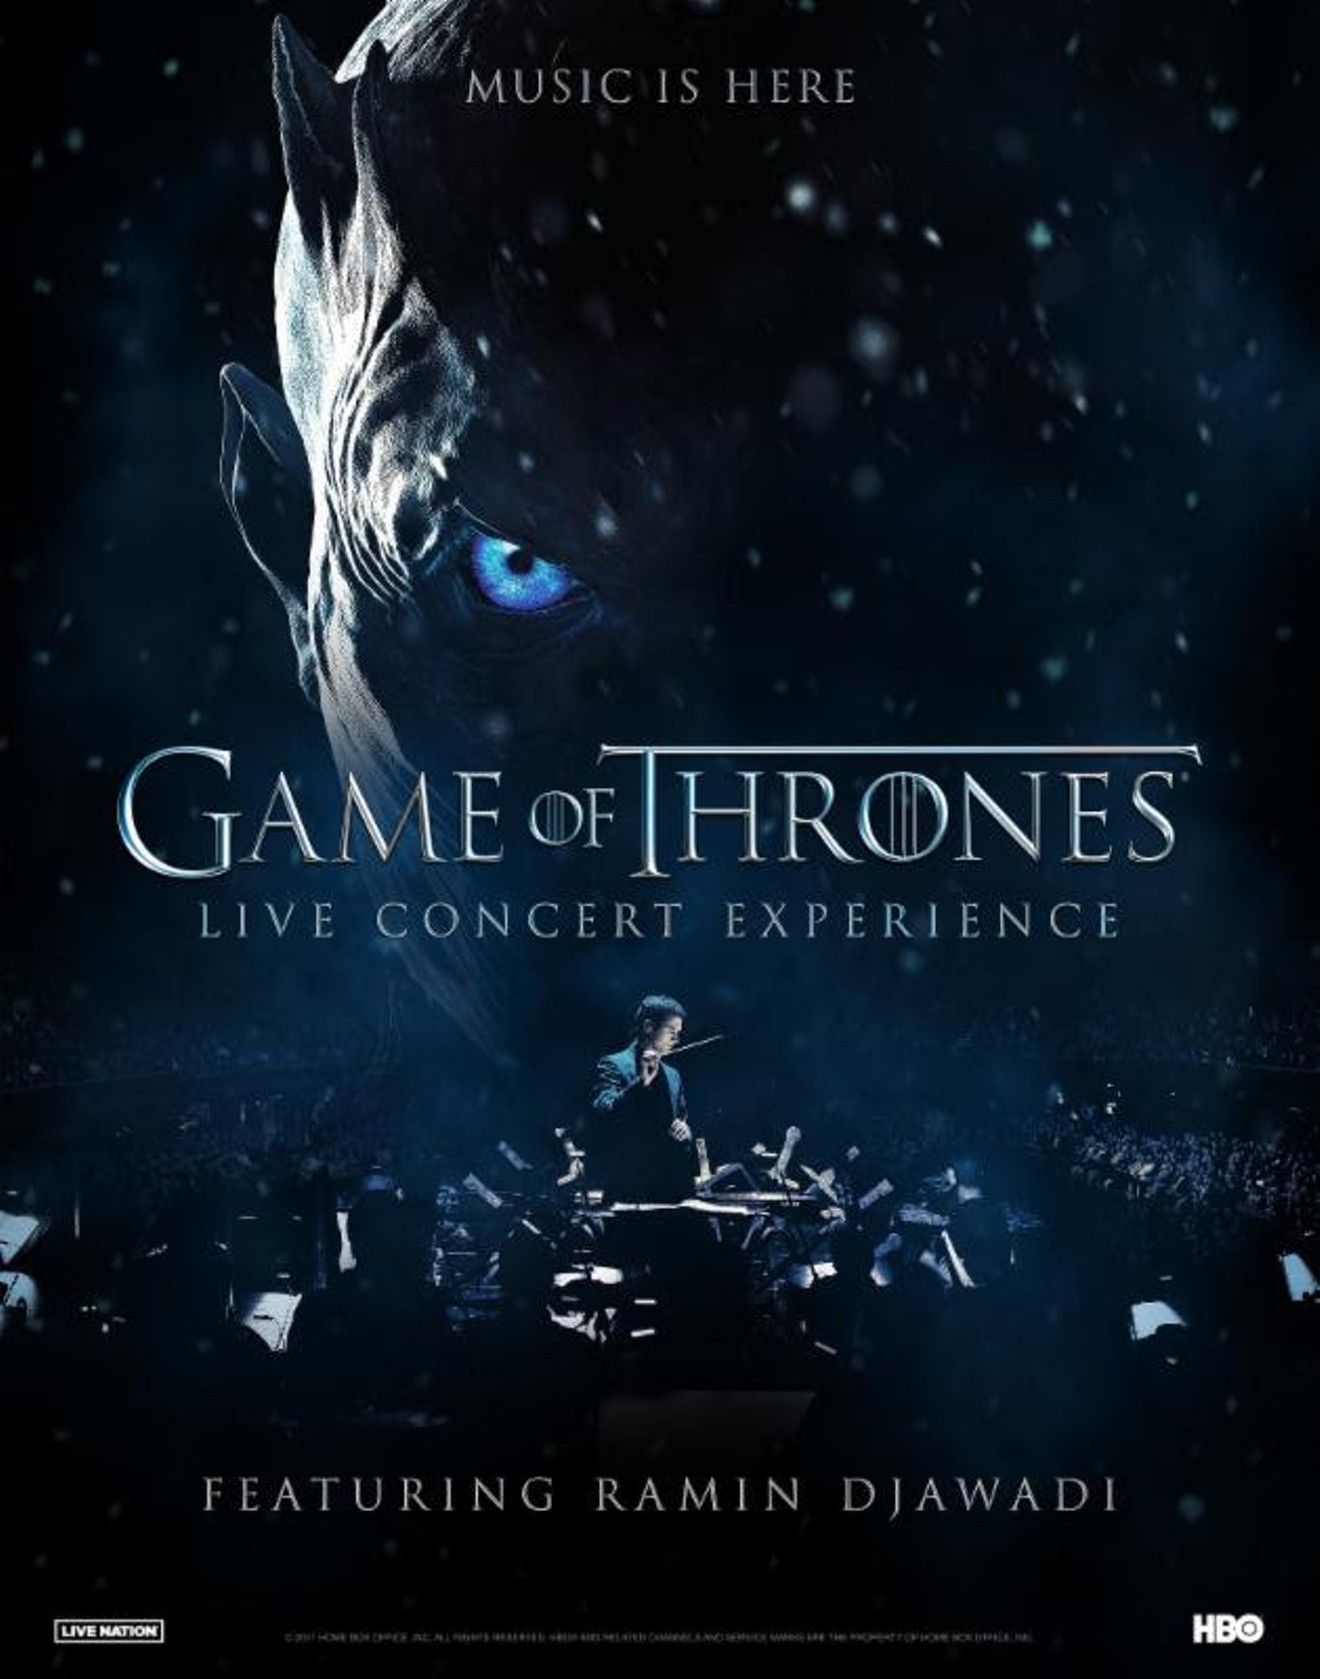 The Game of Thrones Live Concert Experience comes to American Airlines Center next fall.